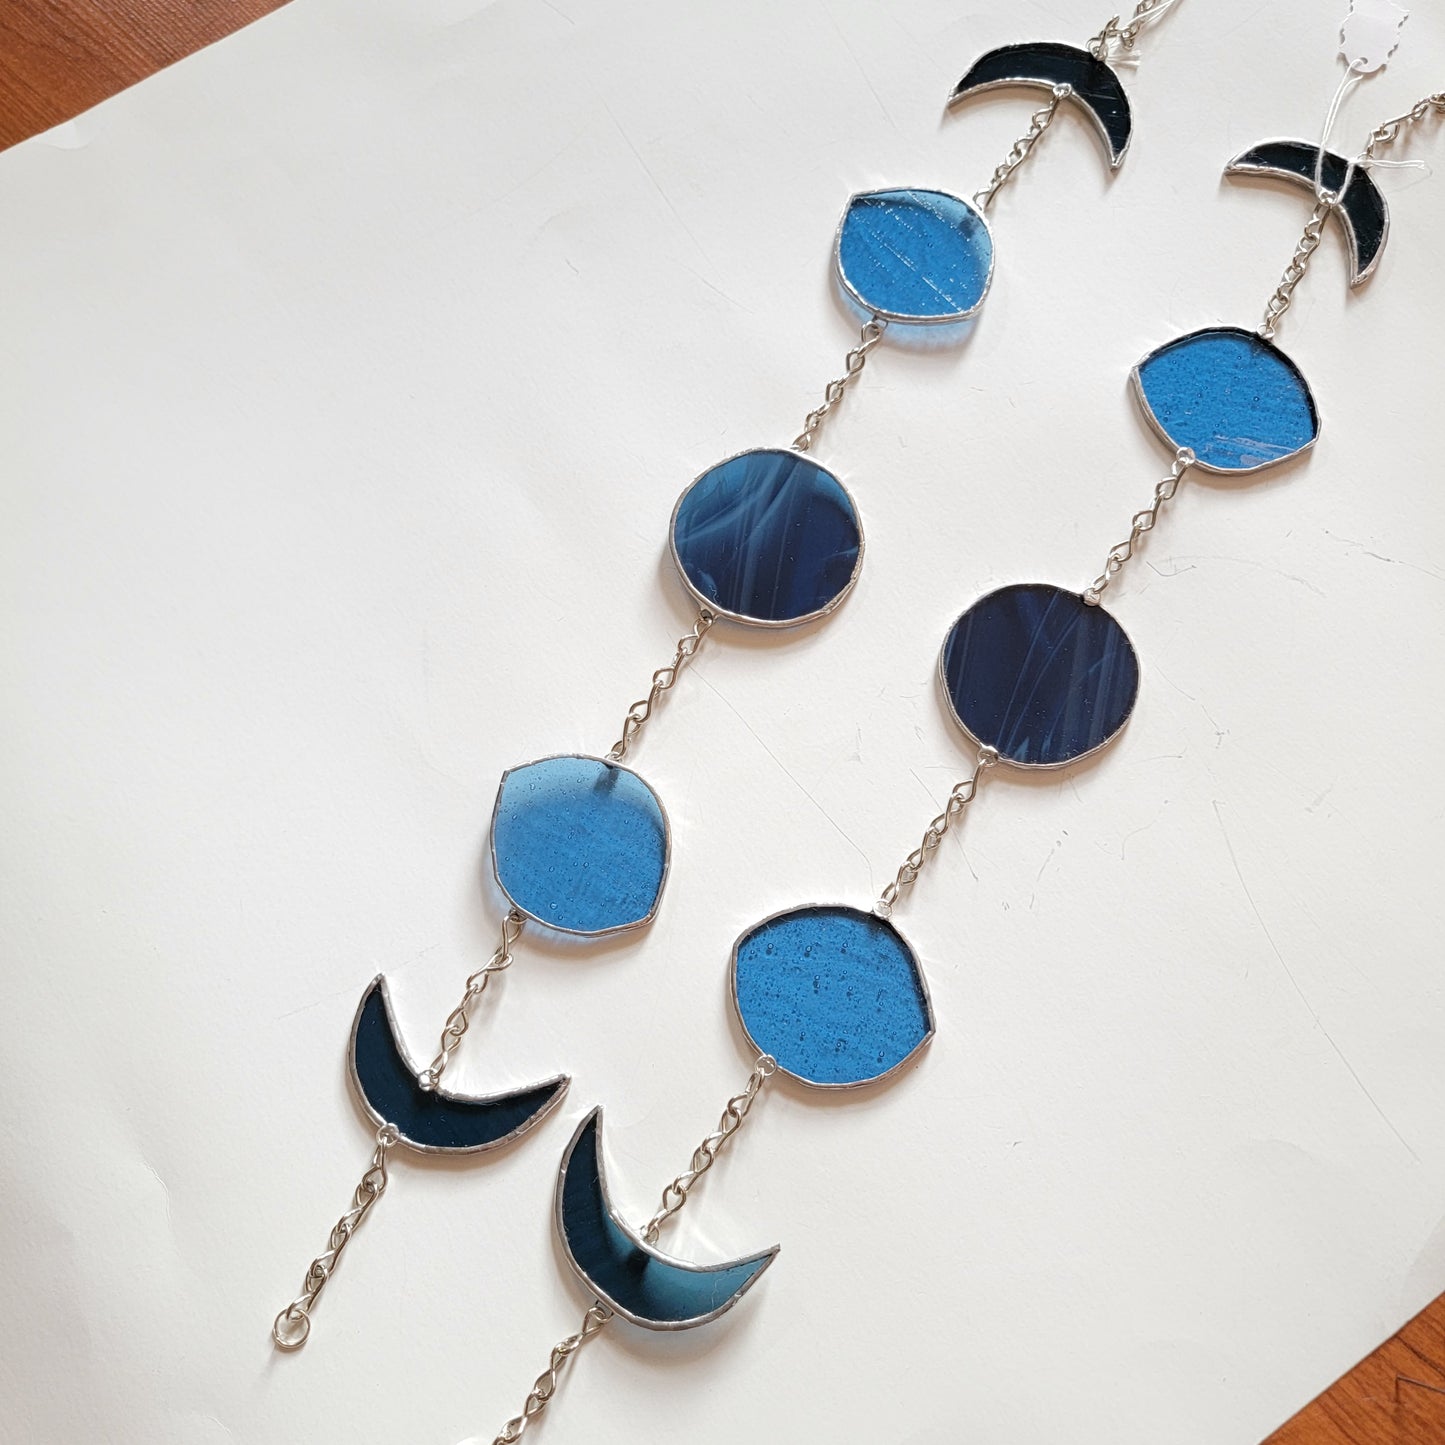 Moon Phase Stained Glass Window Suncatcher